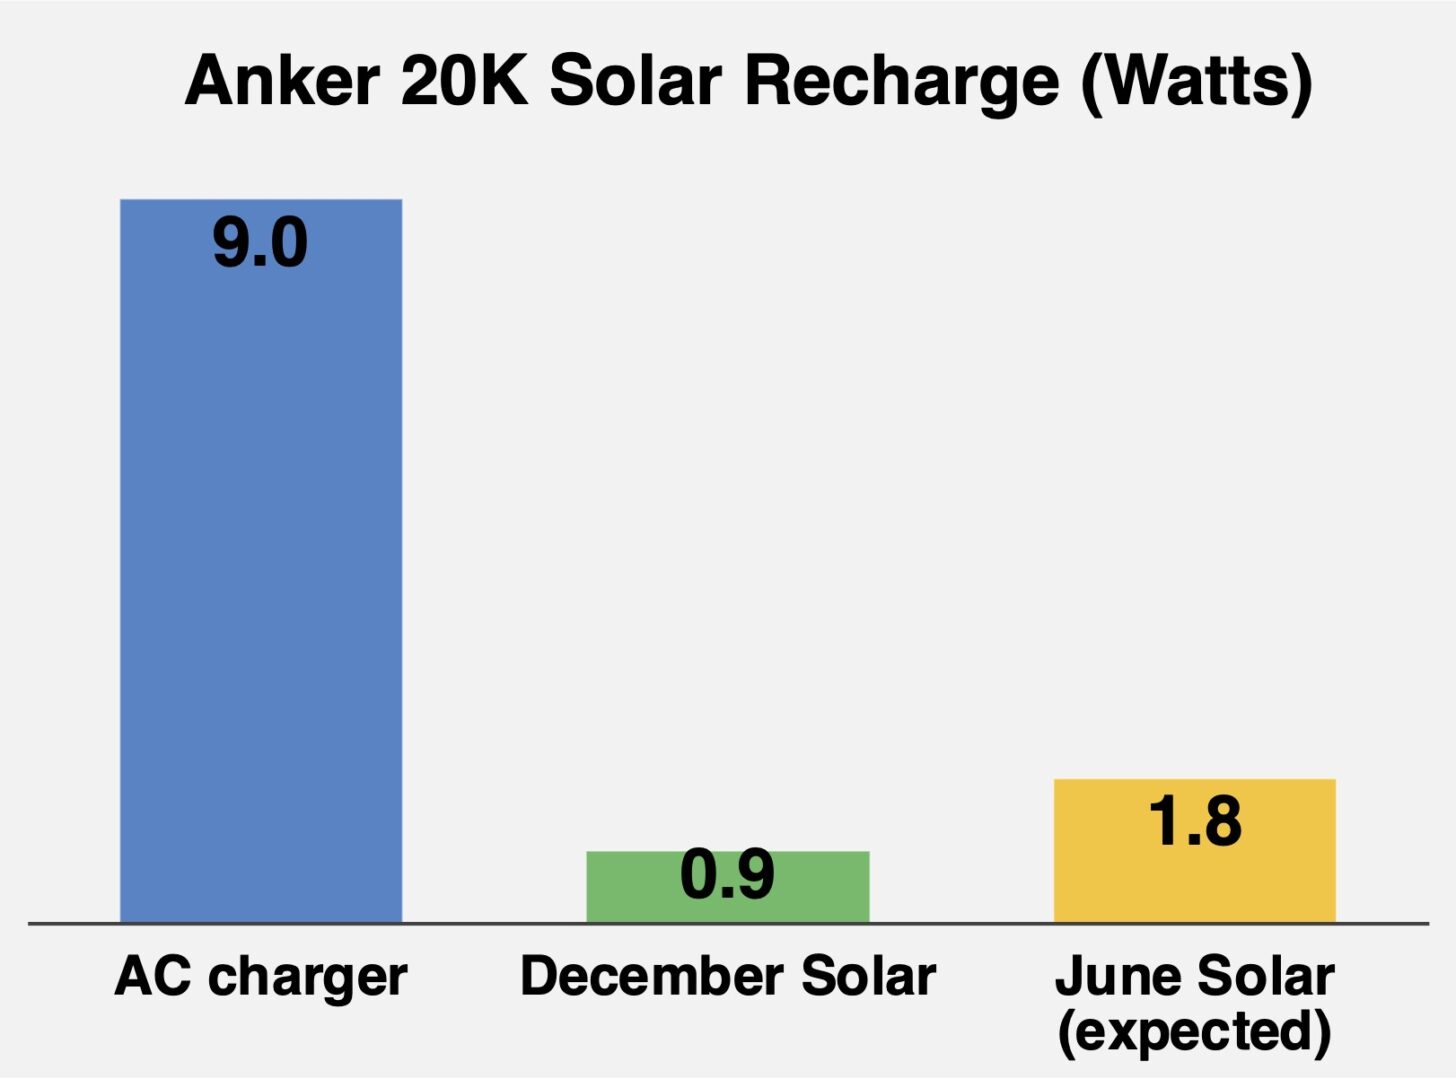 Chart comparing measured Anker 20K Solar recharge watts for an AC charger, measured December solar power, and expected June solar power. Higher numbers are better.